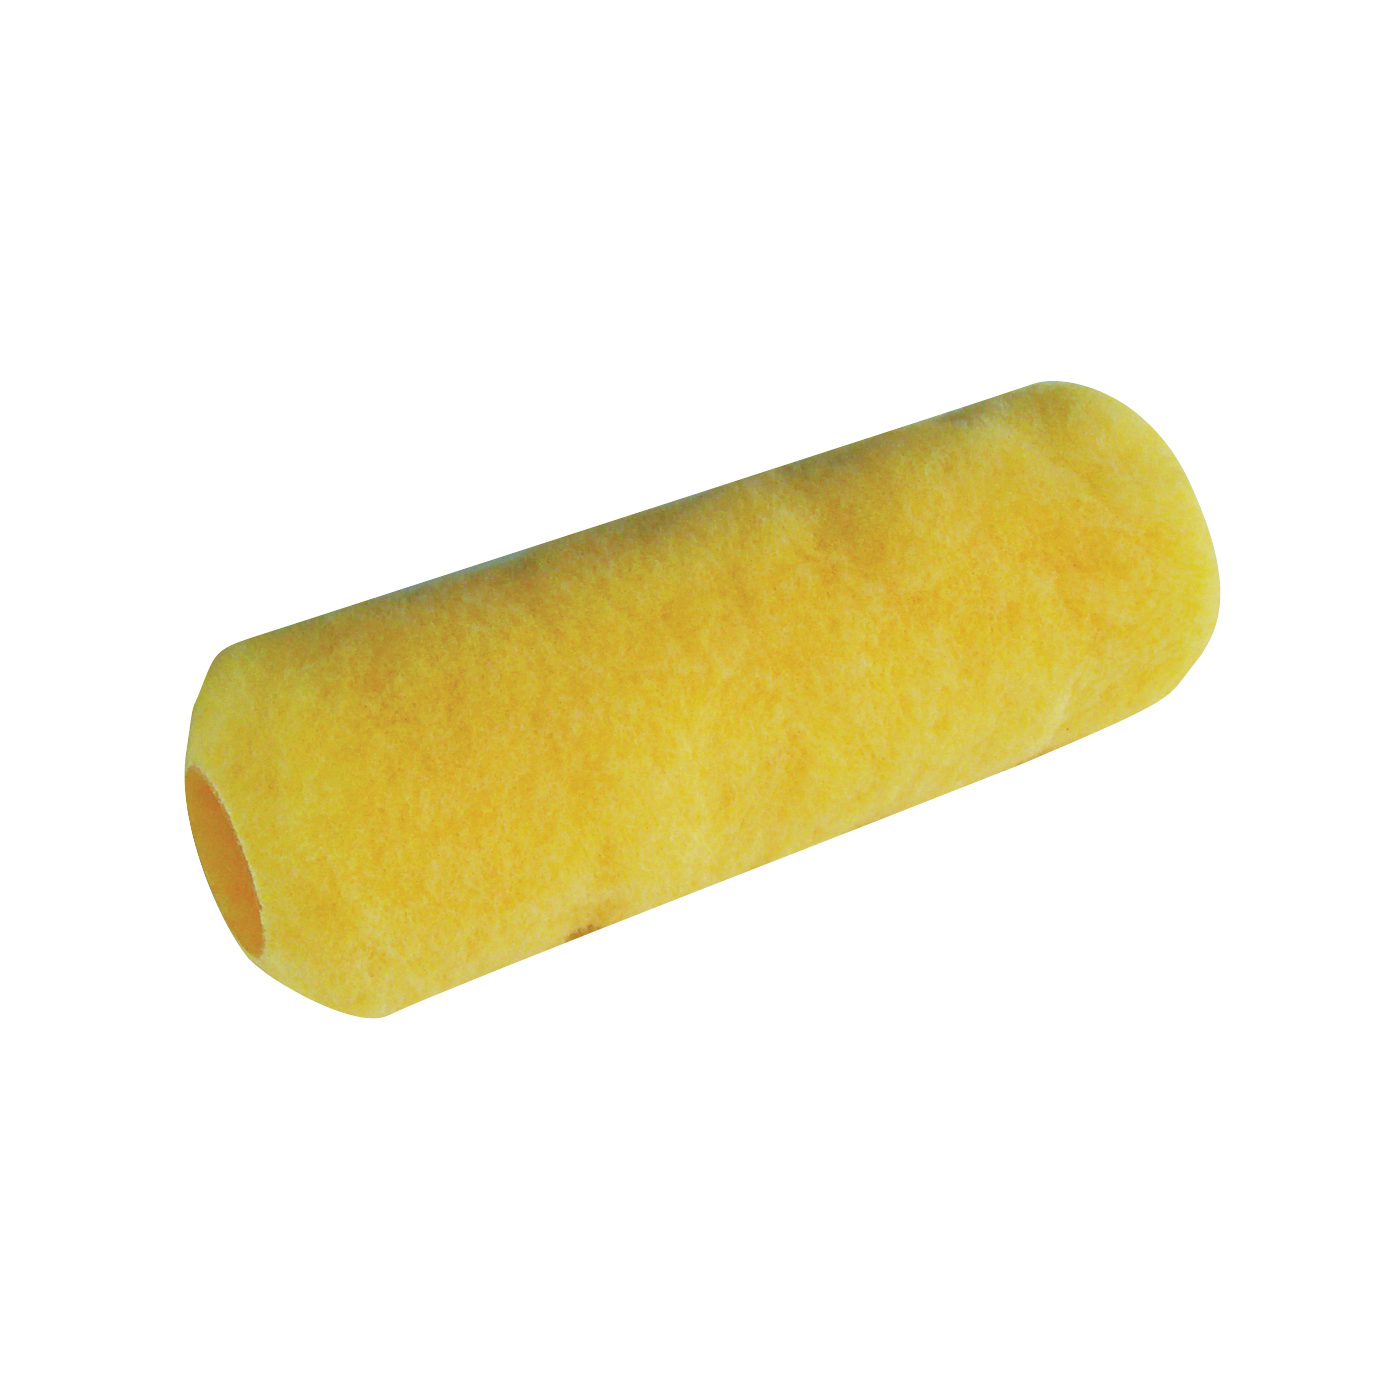 RC 145 Paint Roller Cover, 3/4 in Thick Nap, 9 in L, High-Density Polyester Cover